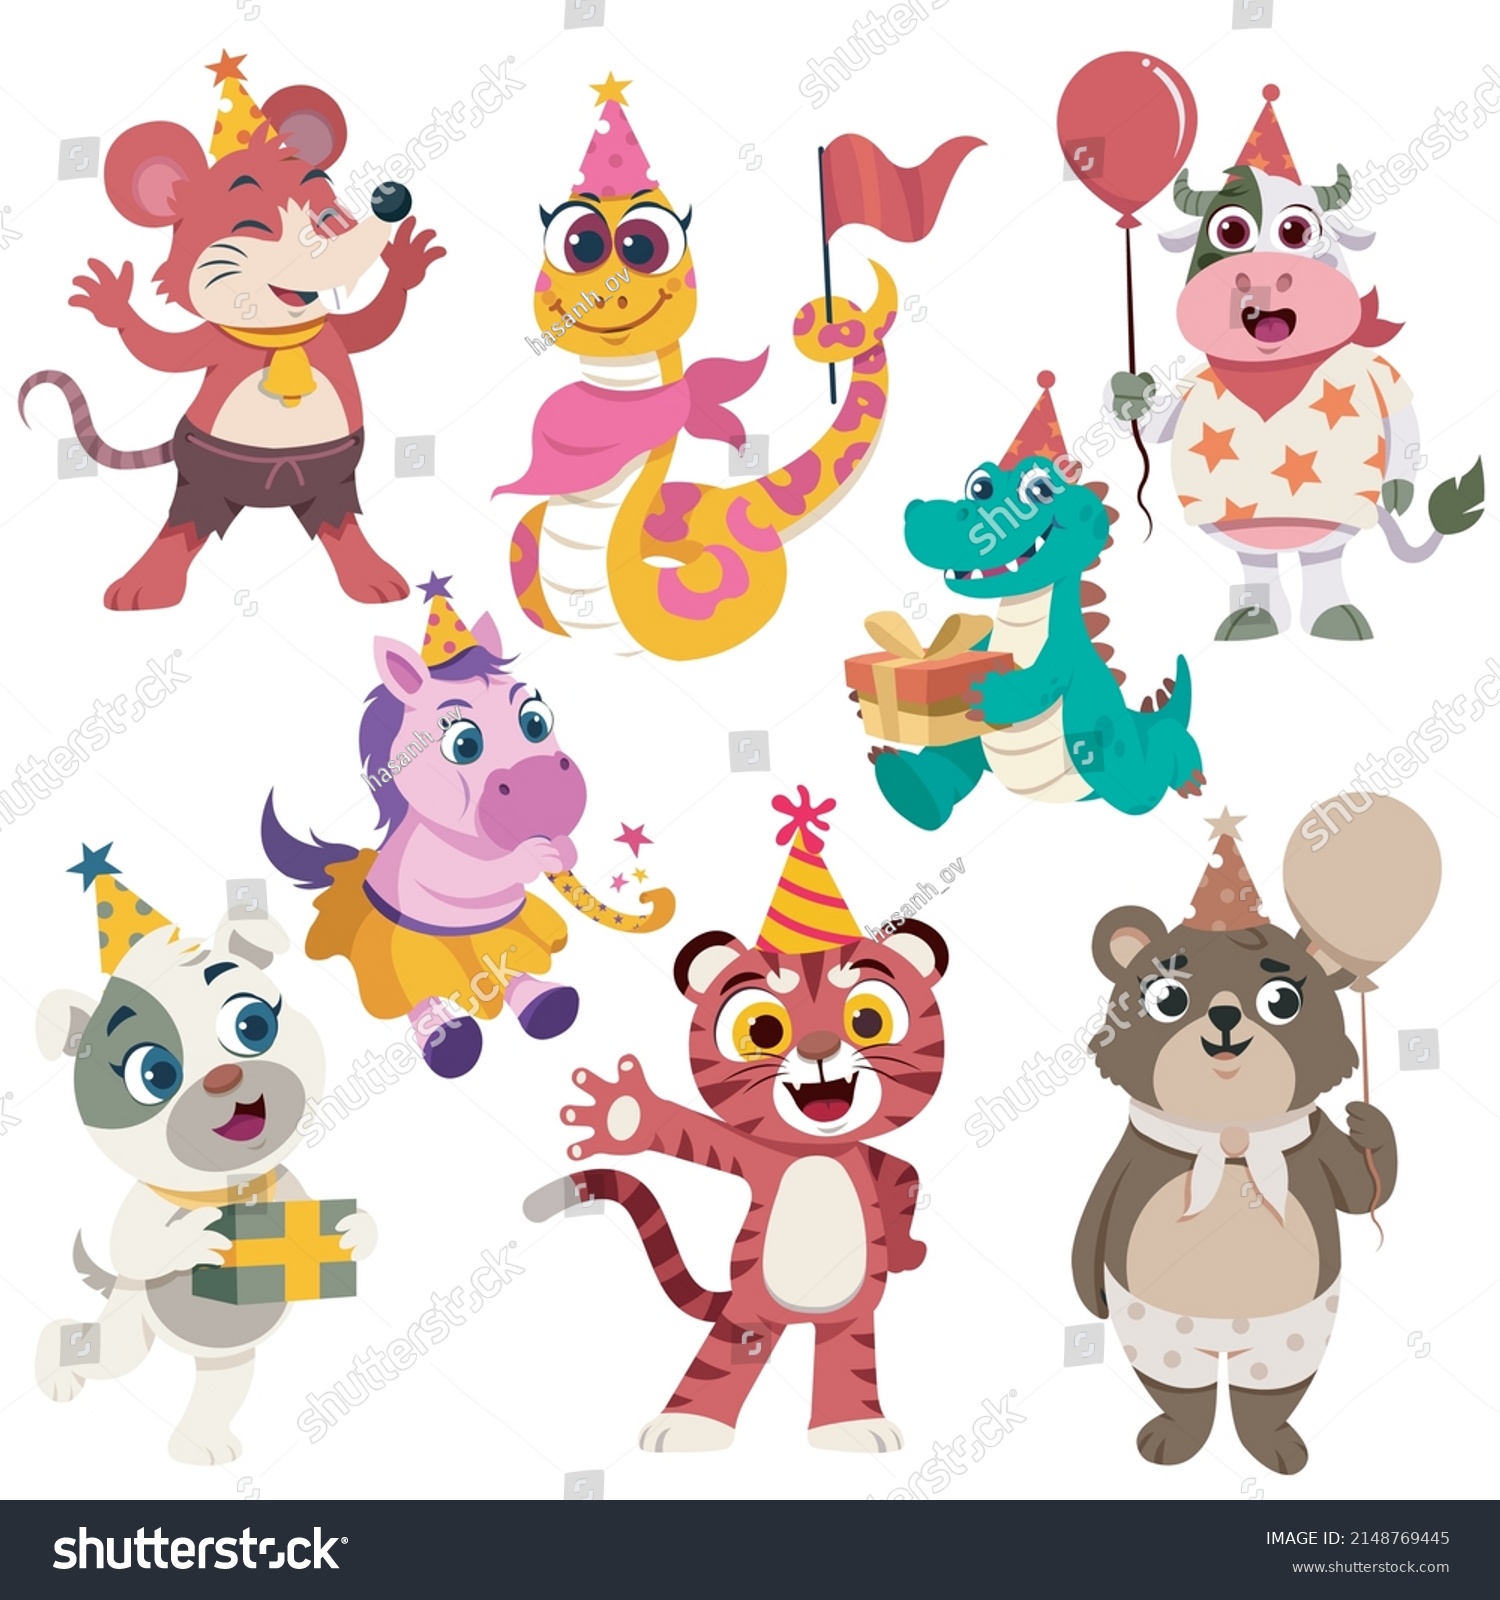 SVG of Birthday decor icons cute stylized animals cartoon characters SVG svg